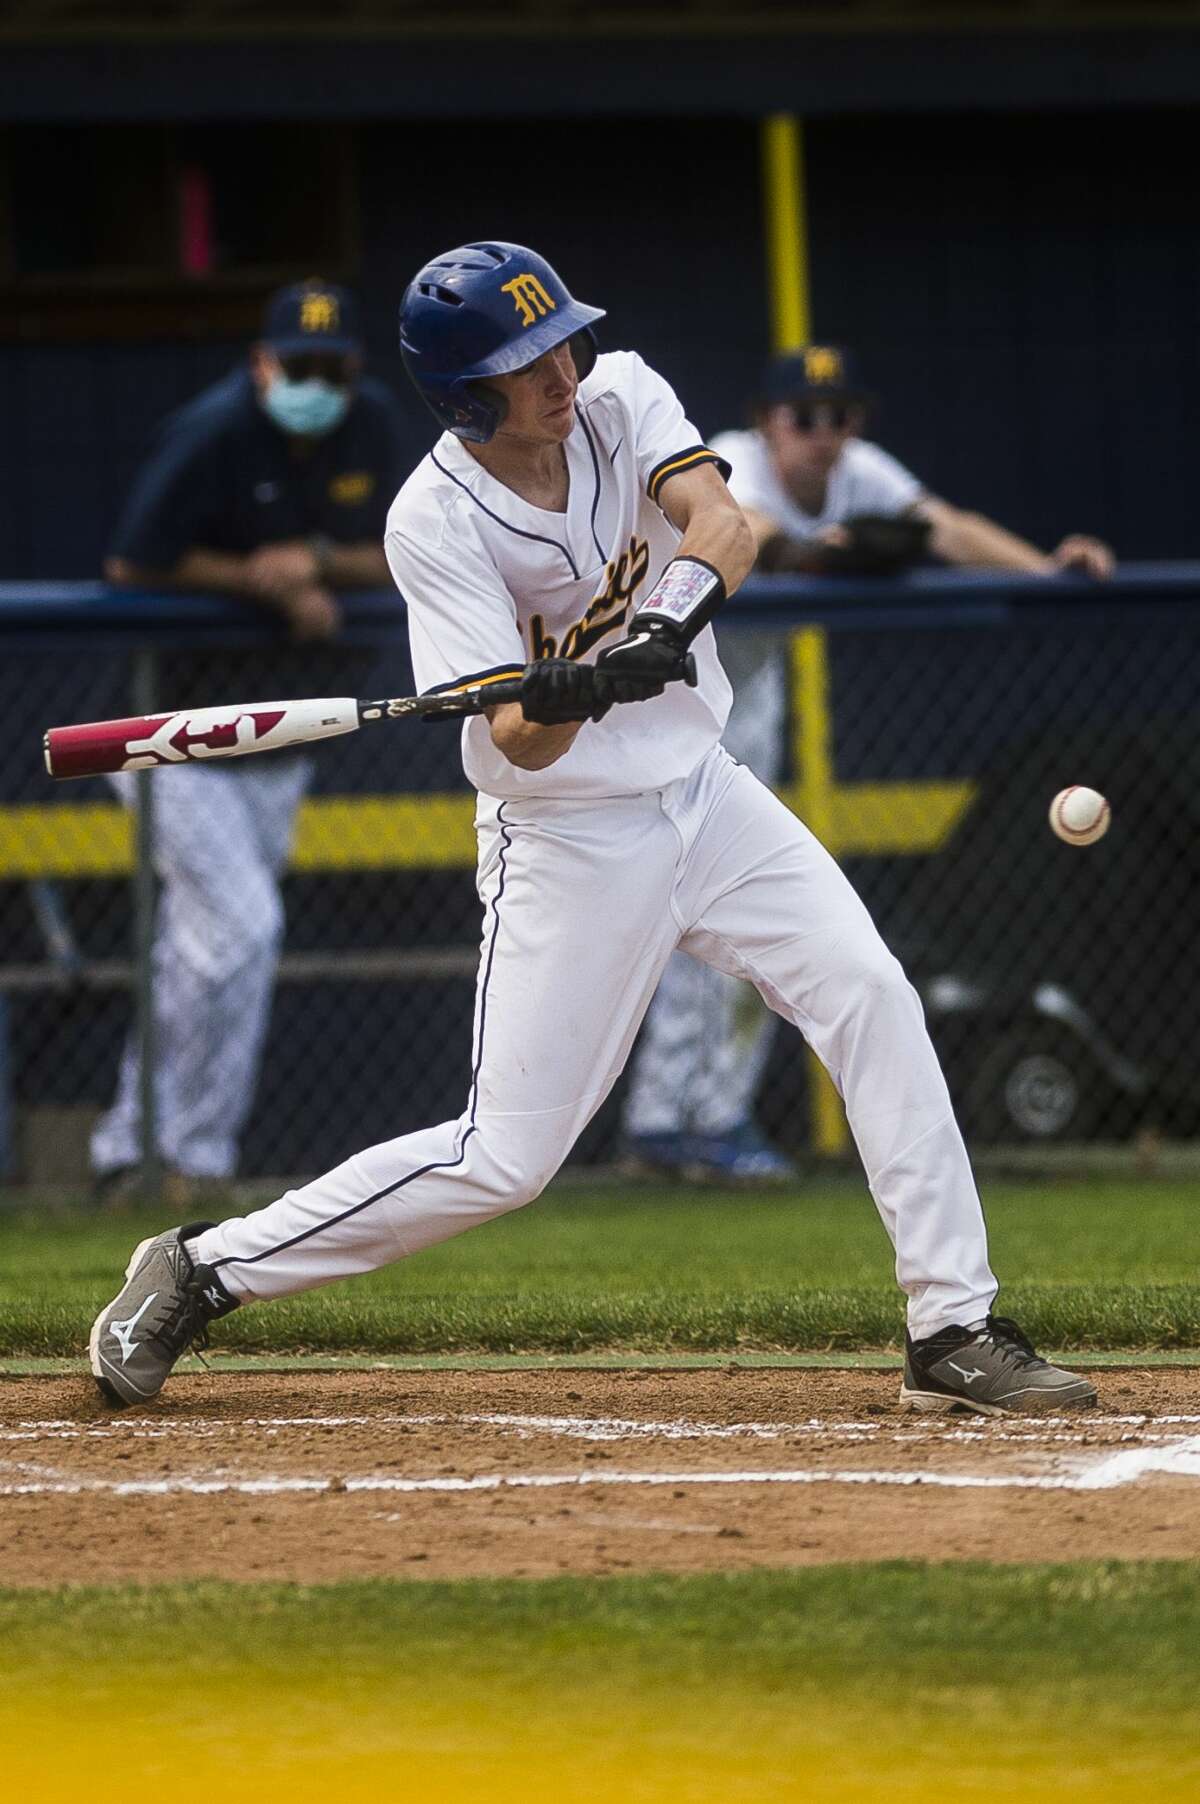 Midland's Joshua Doyle swings on a pitch during the Chemics' game against Traverse City West Thursday, April 8, 2021 at Midland High School. (Katy Kildee/kkildee@mdn.net)